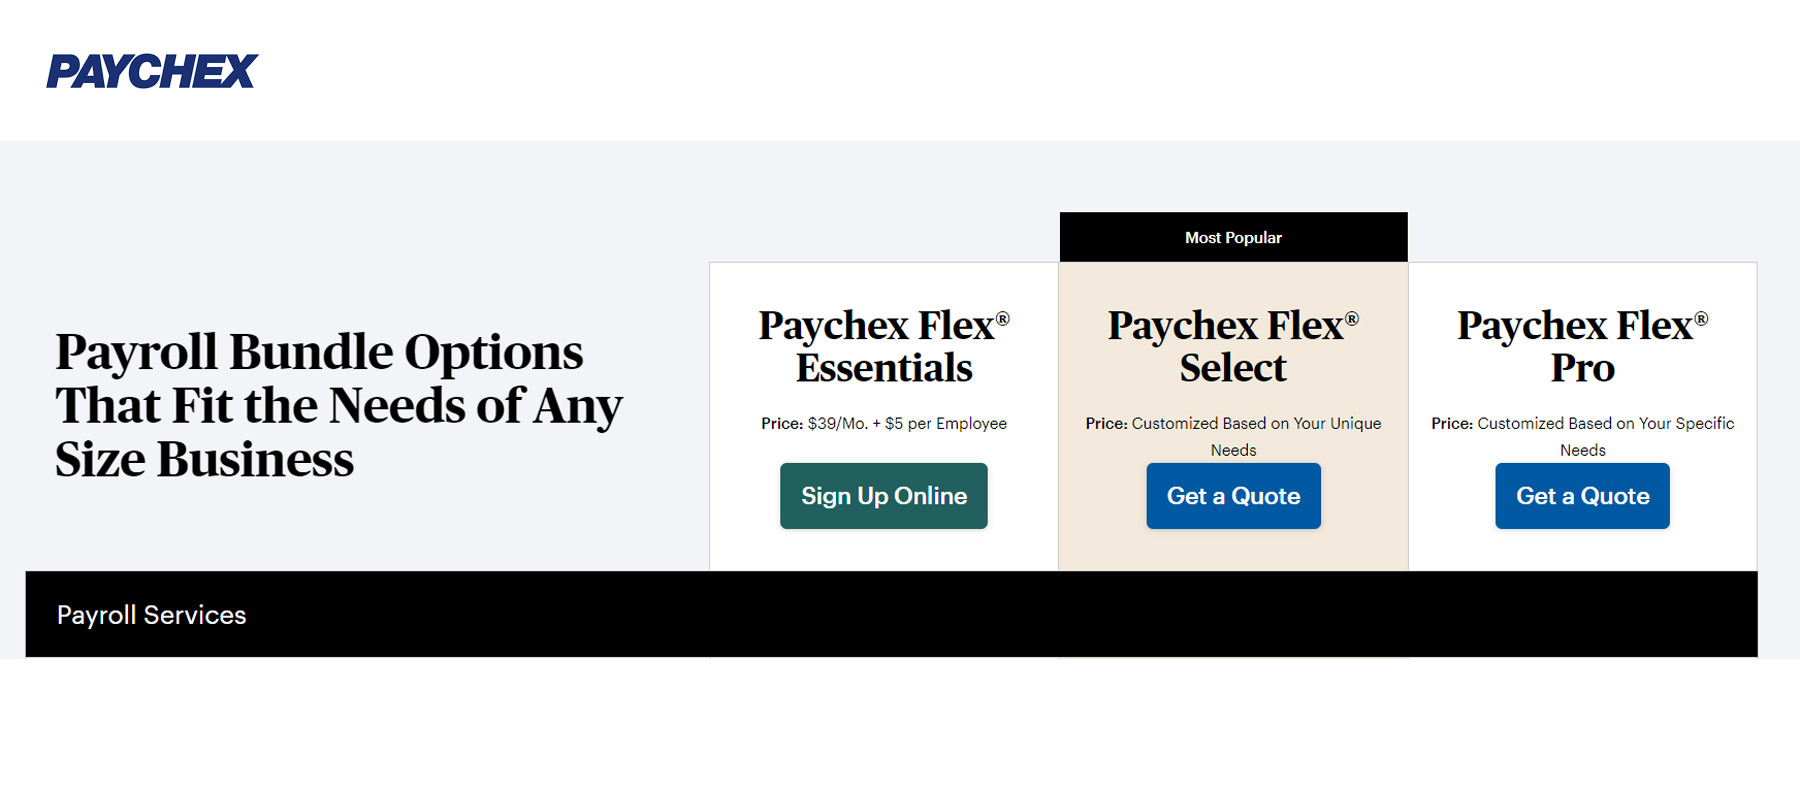 How Much Does Paychex Flex Payroll Cost Per Month?